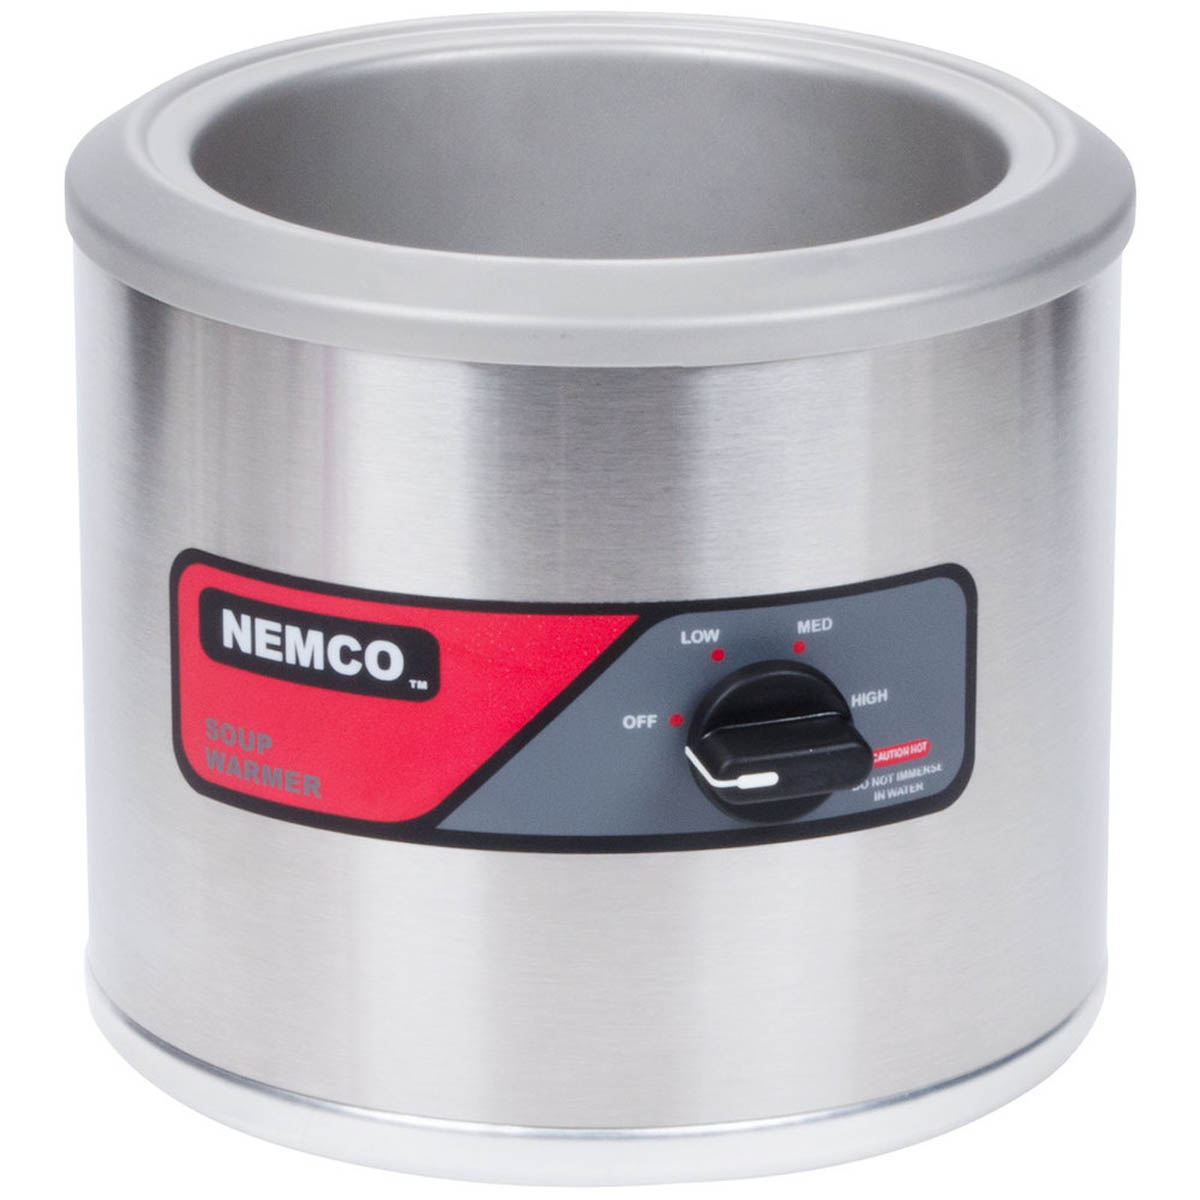 Nemco 6100A-ICL Countertop Food Pan Warmer w/ 7-Qt. Capacity, Adjustable Thermostat, Inset